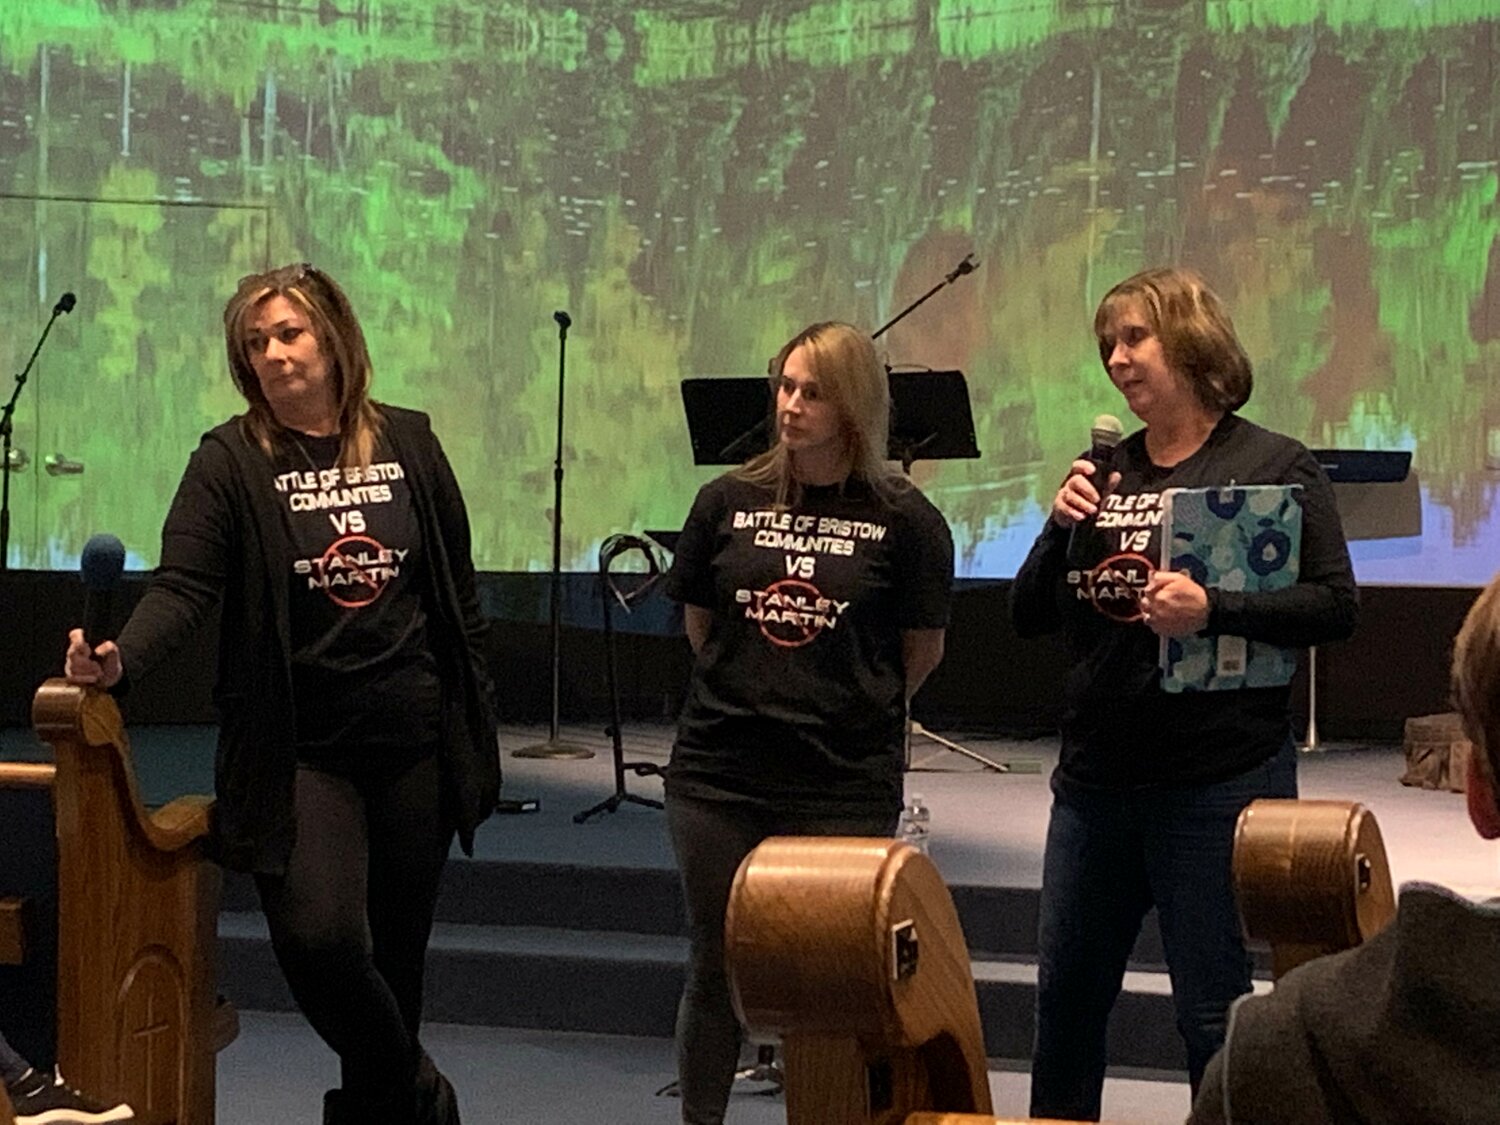 Donna Gallant, Laura Mahony and Bethany Kelley encourage attendees to help them oppose the Devlin Tech Park application.